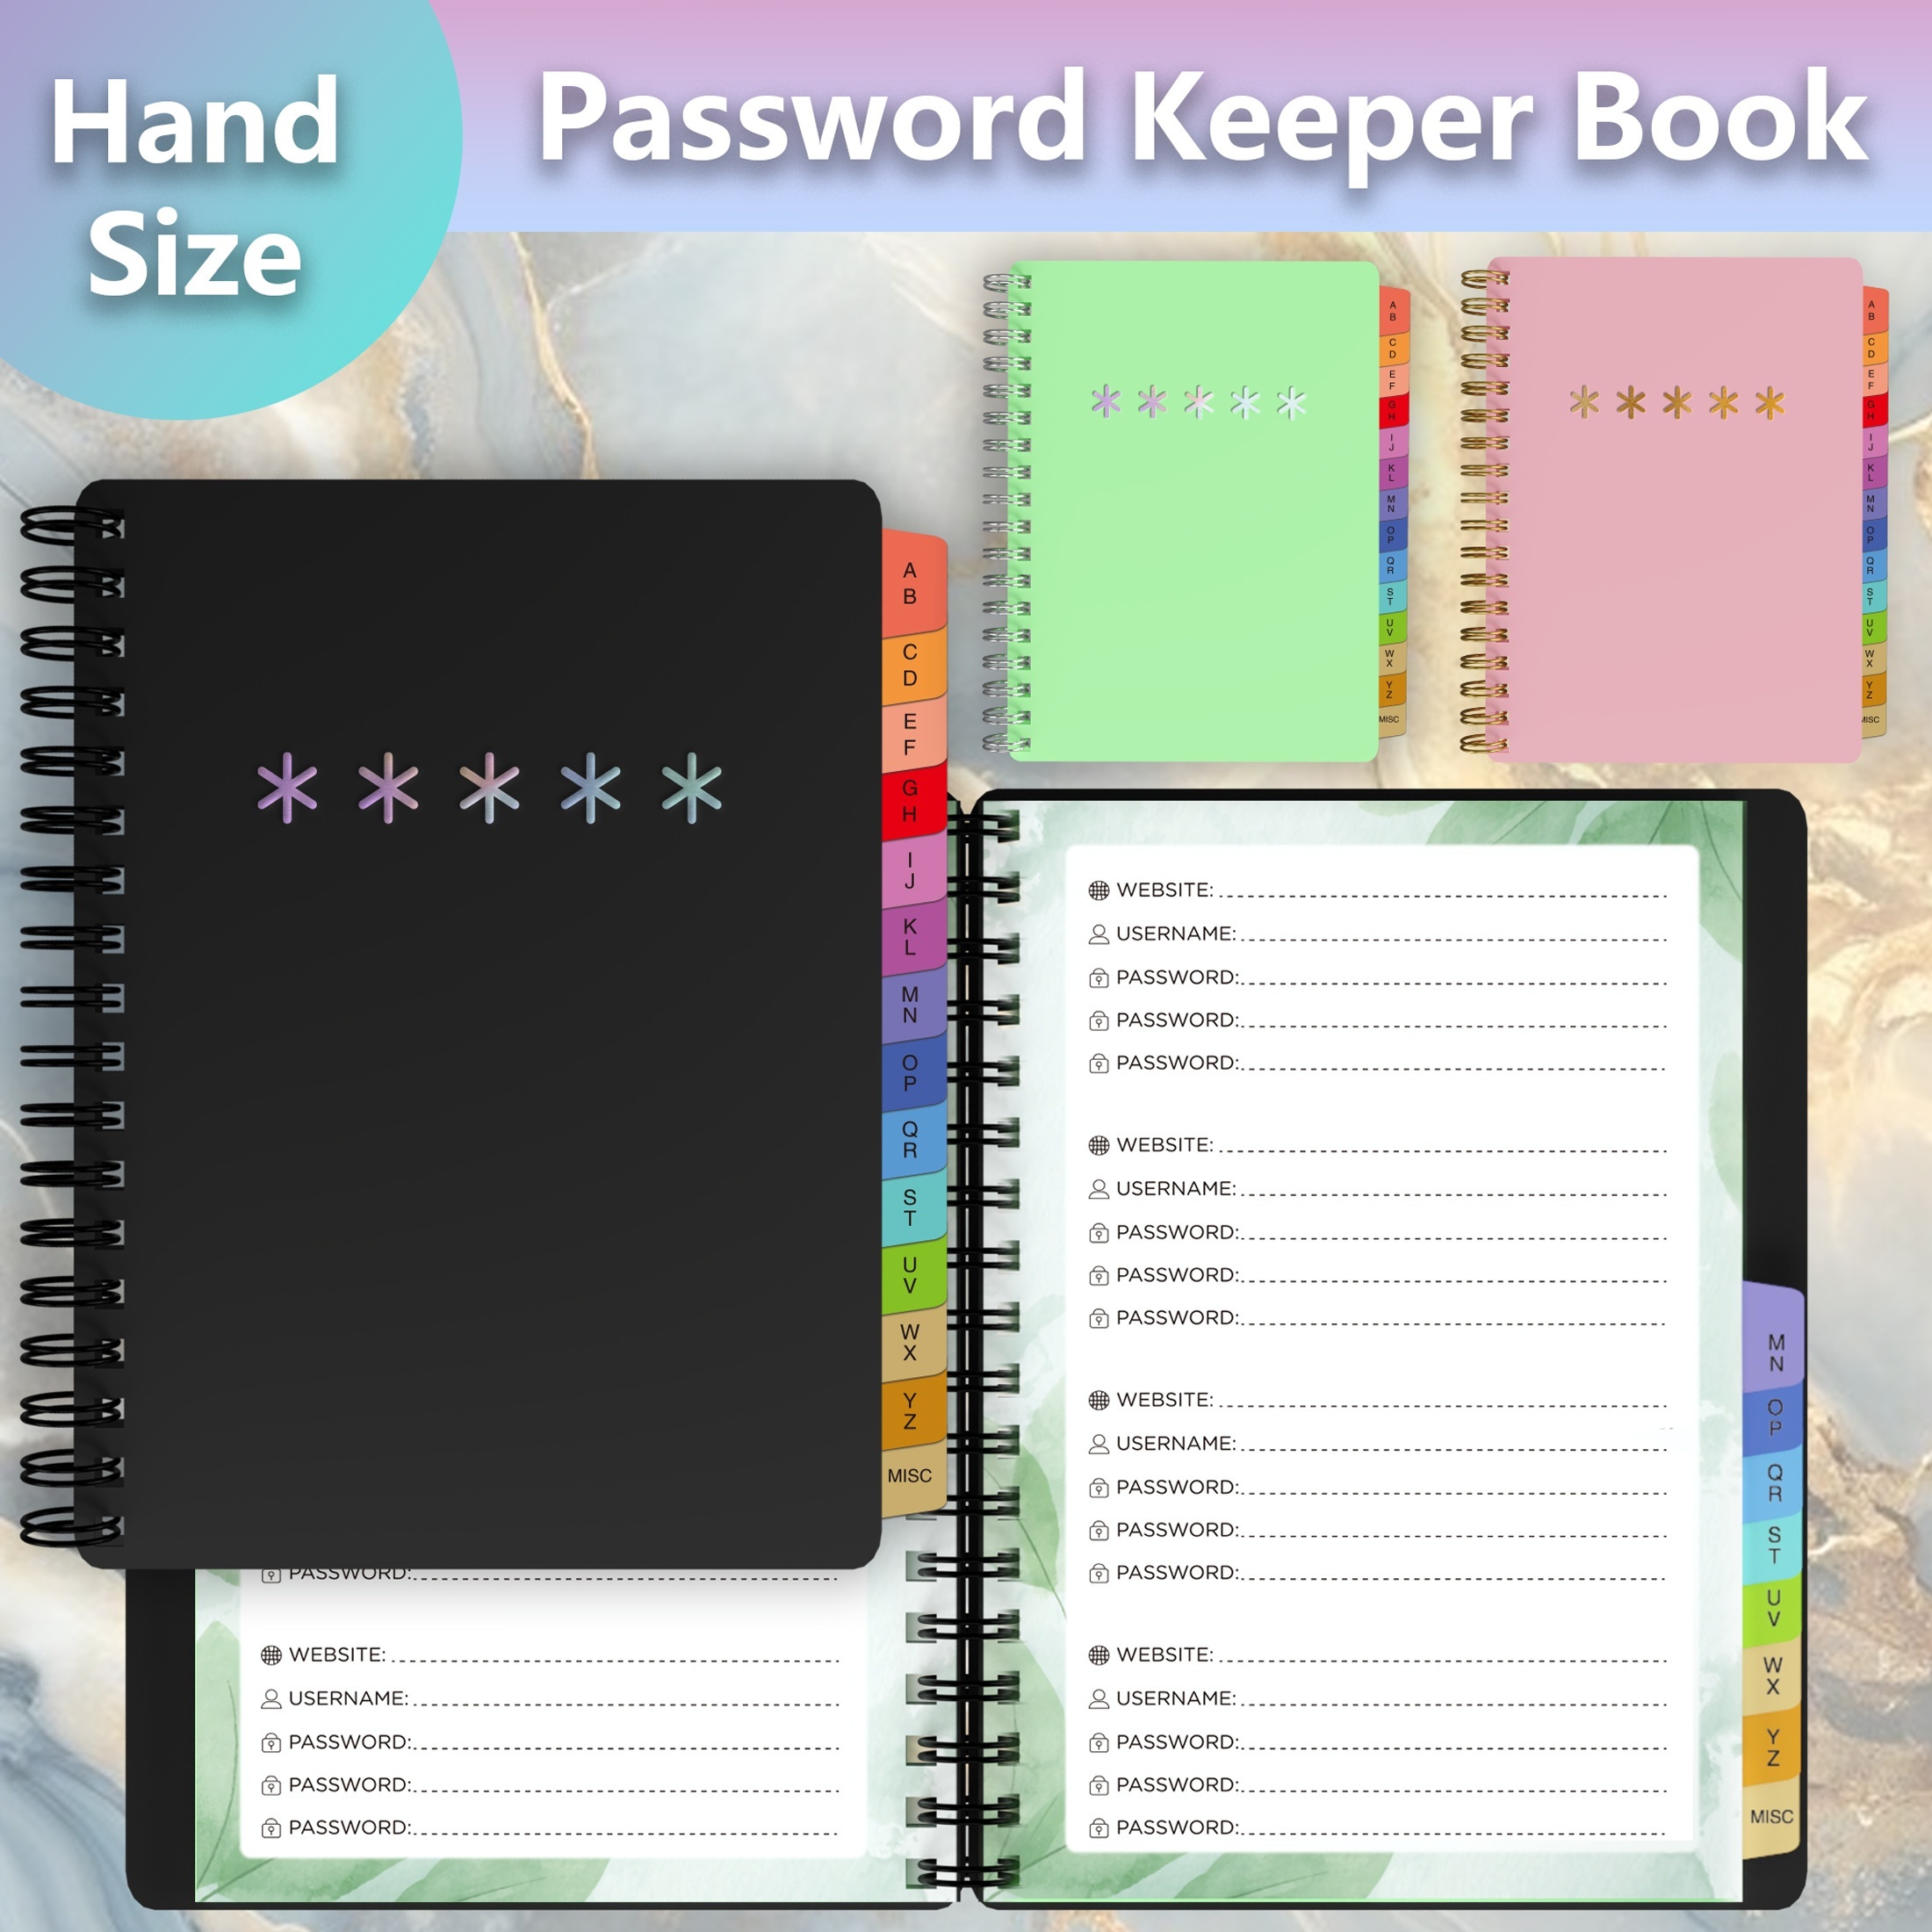 

Spiral Password Book With Colorful Alphabetical Tabs - 4.5x5.8 Inch Passwords Book For Internet Login, Website, Username, Password. Alphabetized Password Book For Home Or Office